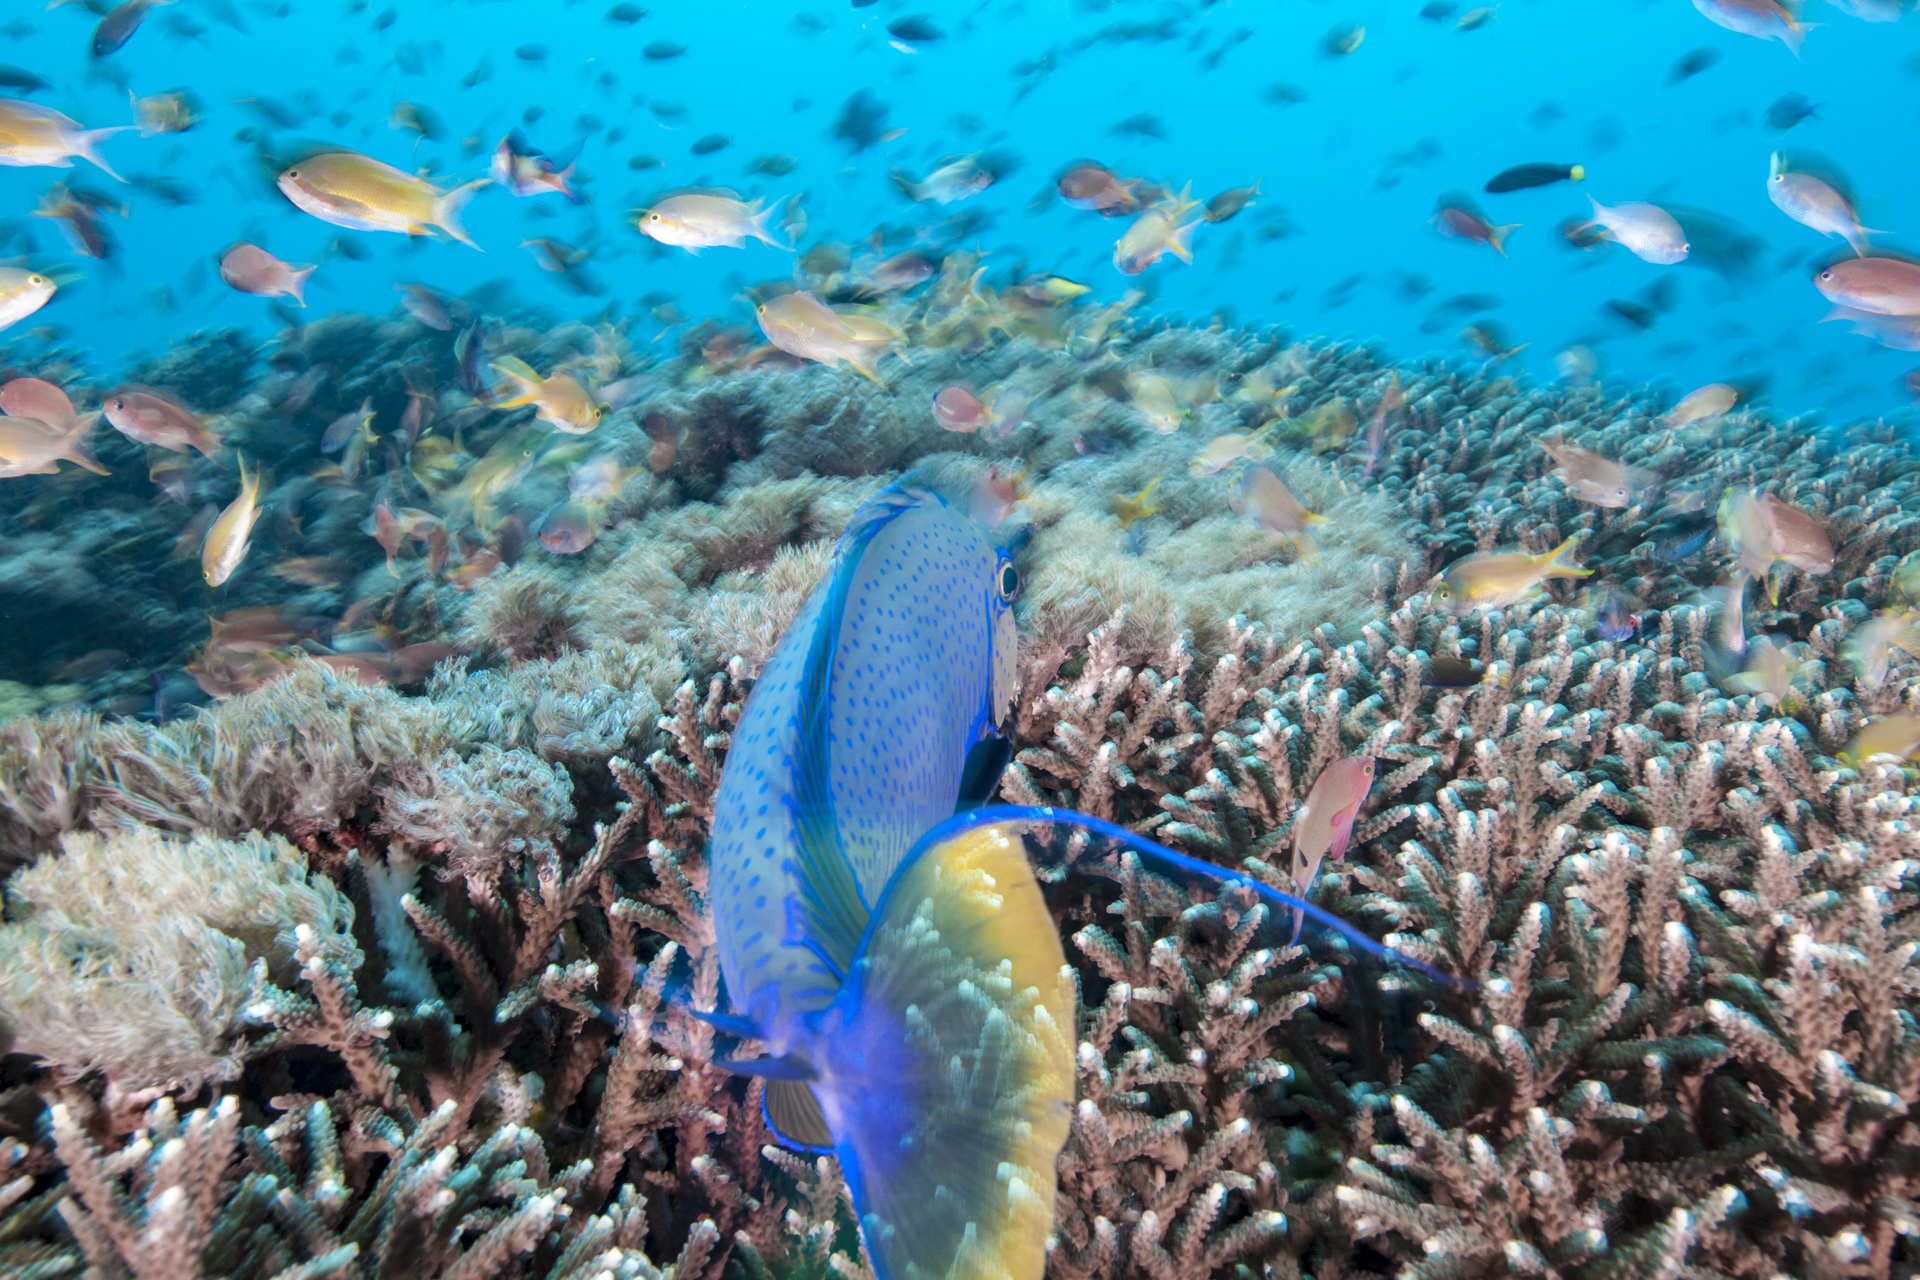 A large blue fish swims away from the camera over a healthy coral reef in clear water